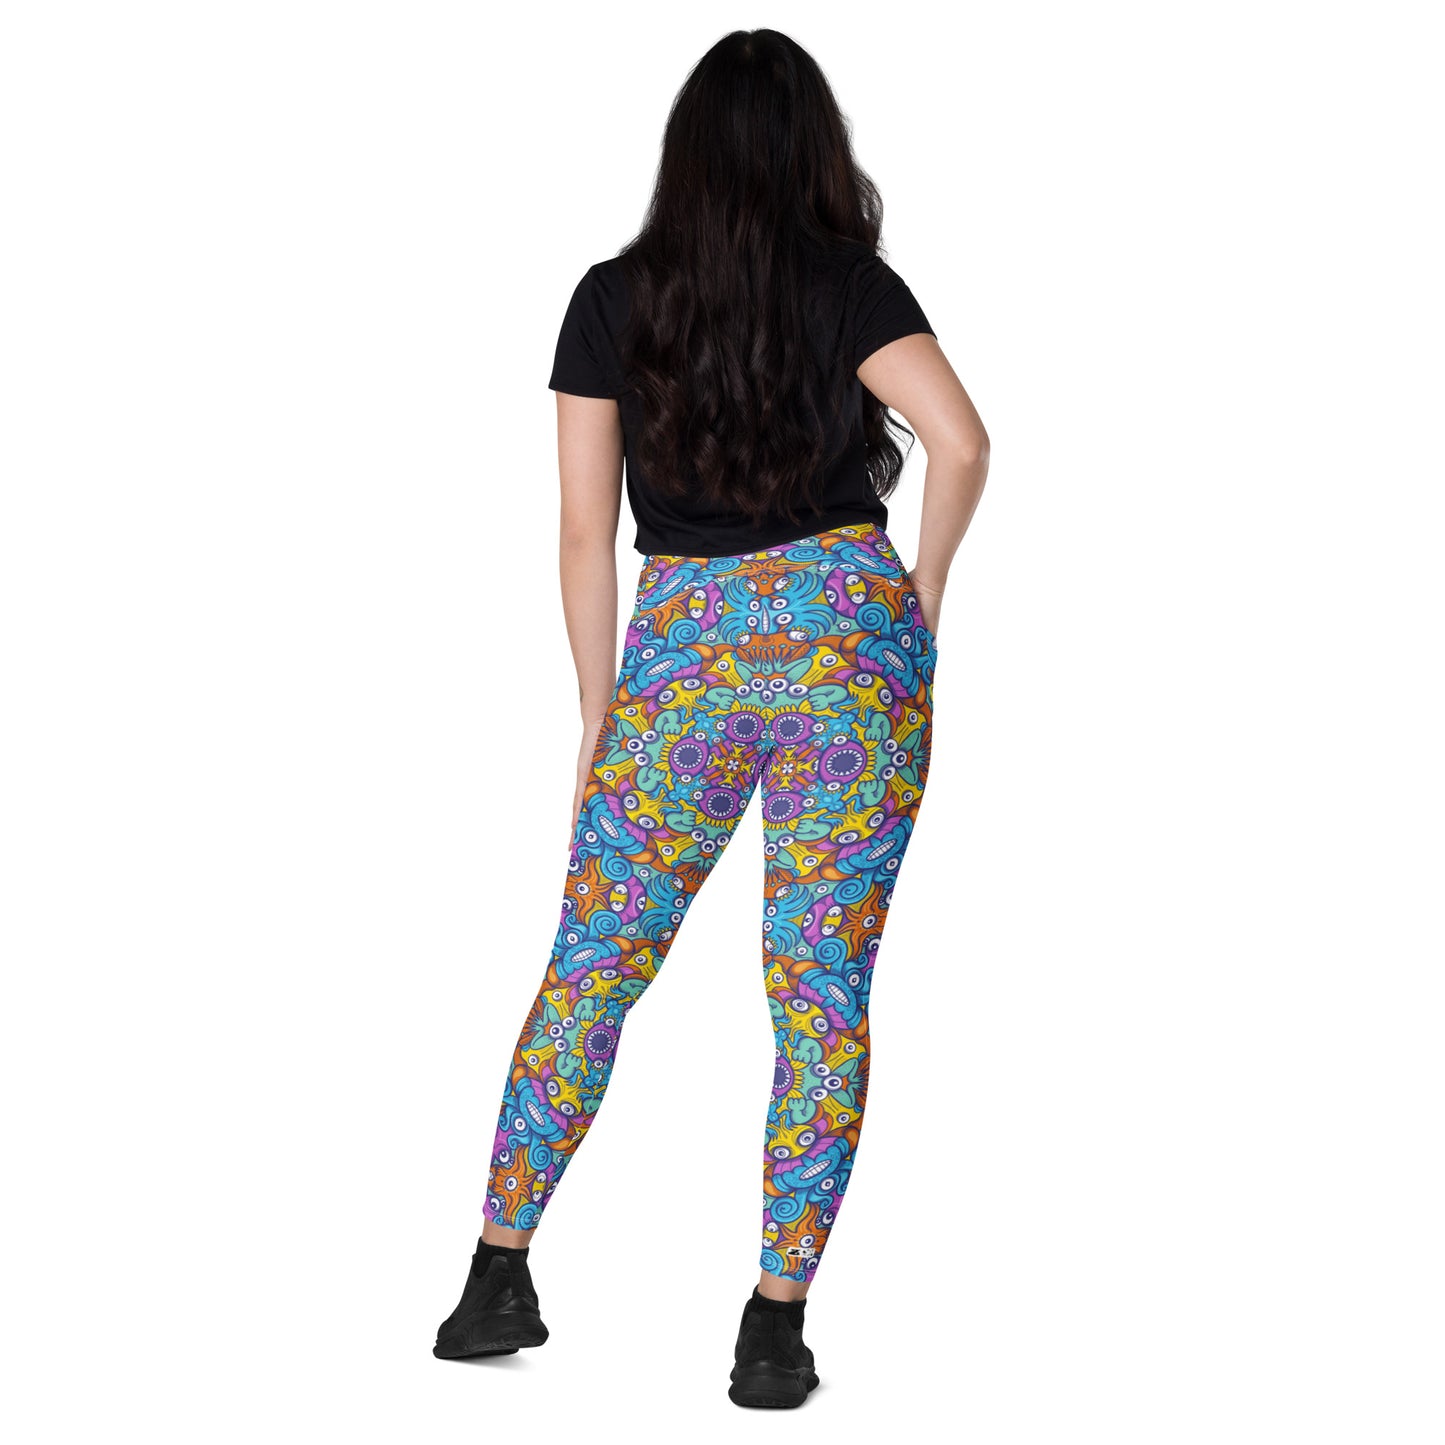 The ultimate sea beasts cast from the deep end of the ocean Crossover leggings with pockets. Back view